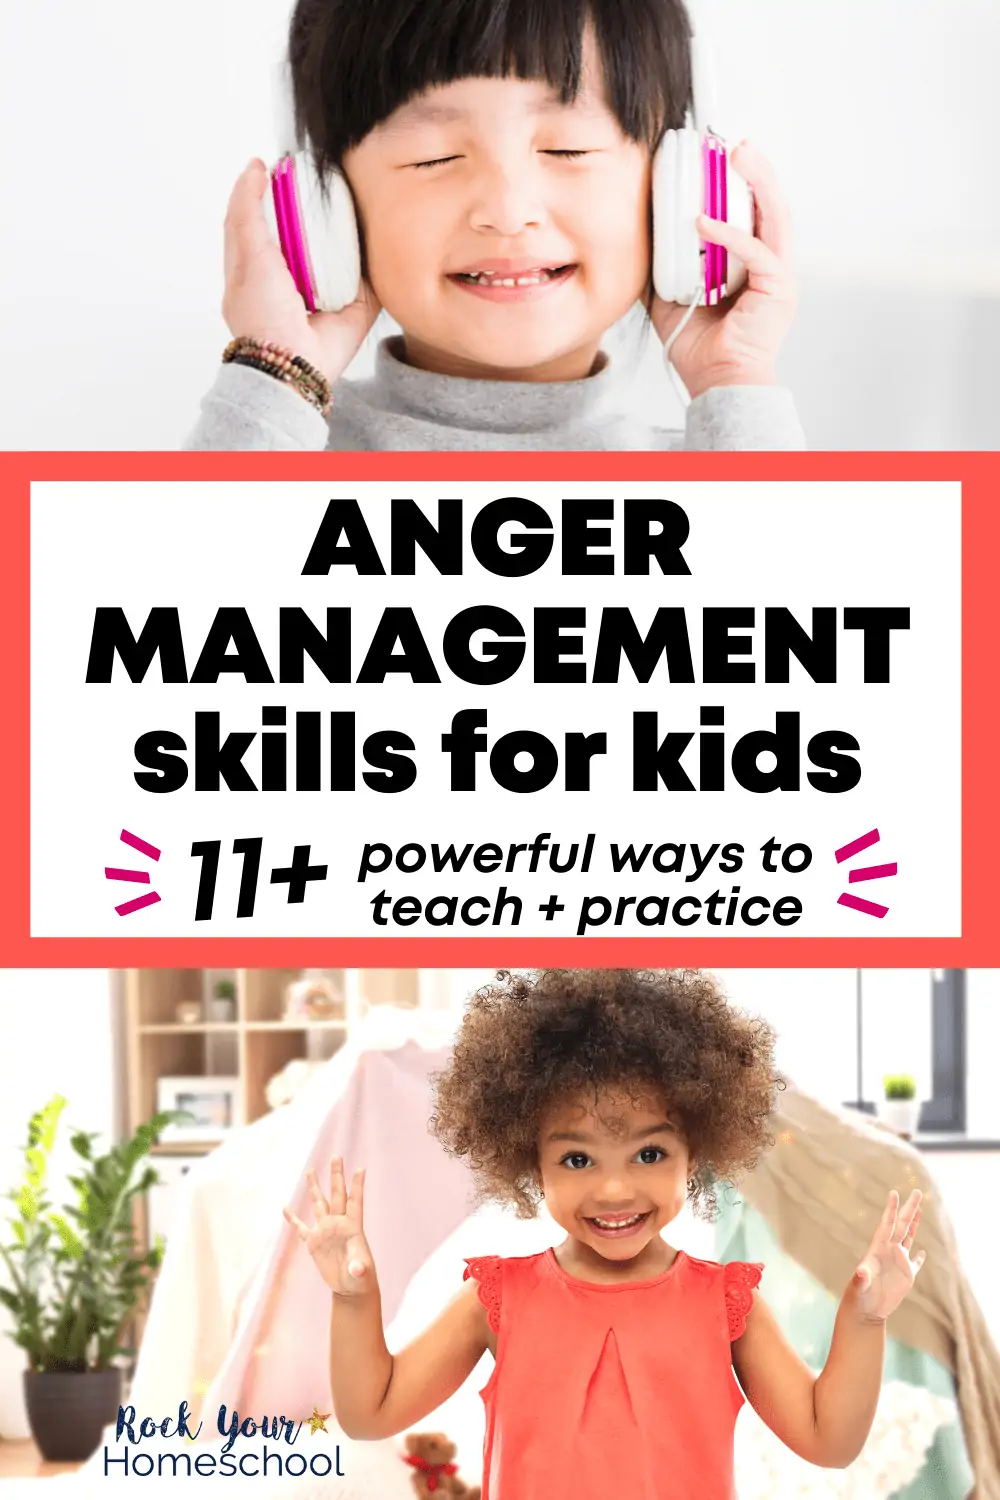 Anger Management Skills for Kids: 11+ Amazing Ways to Teach & Practice